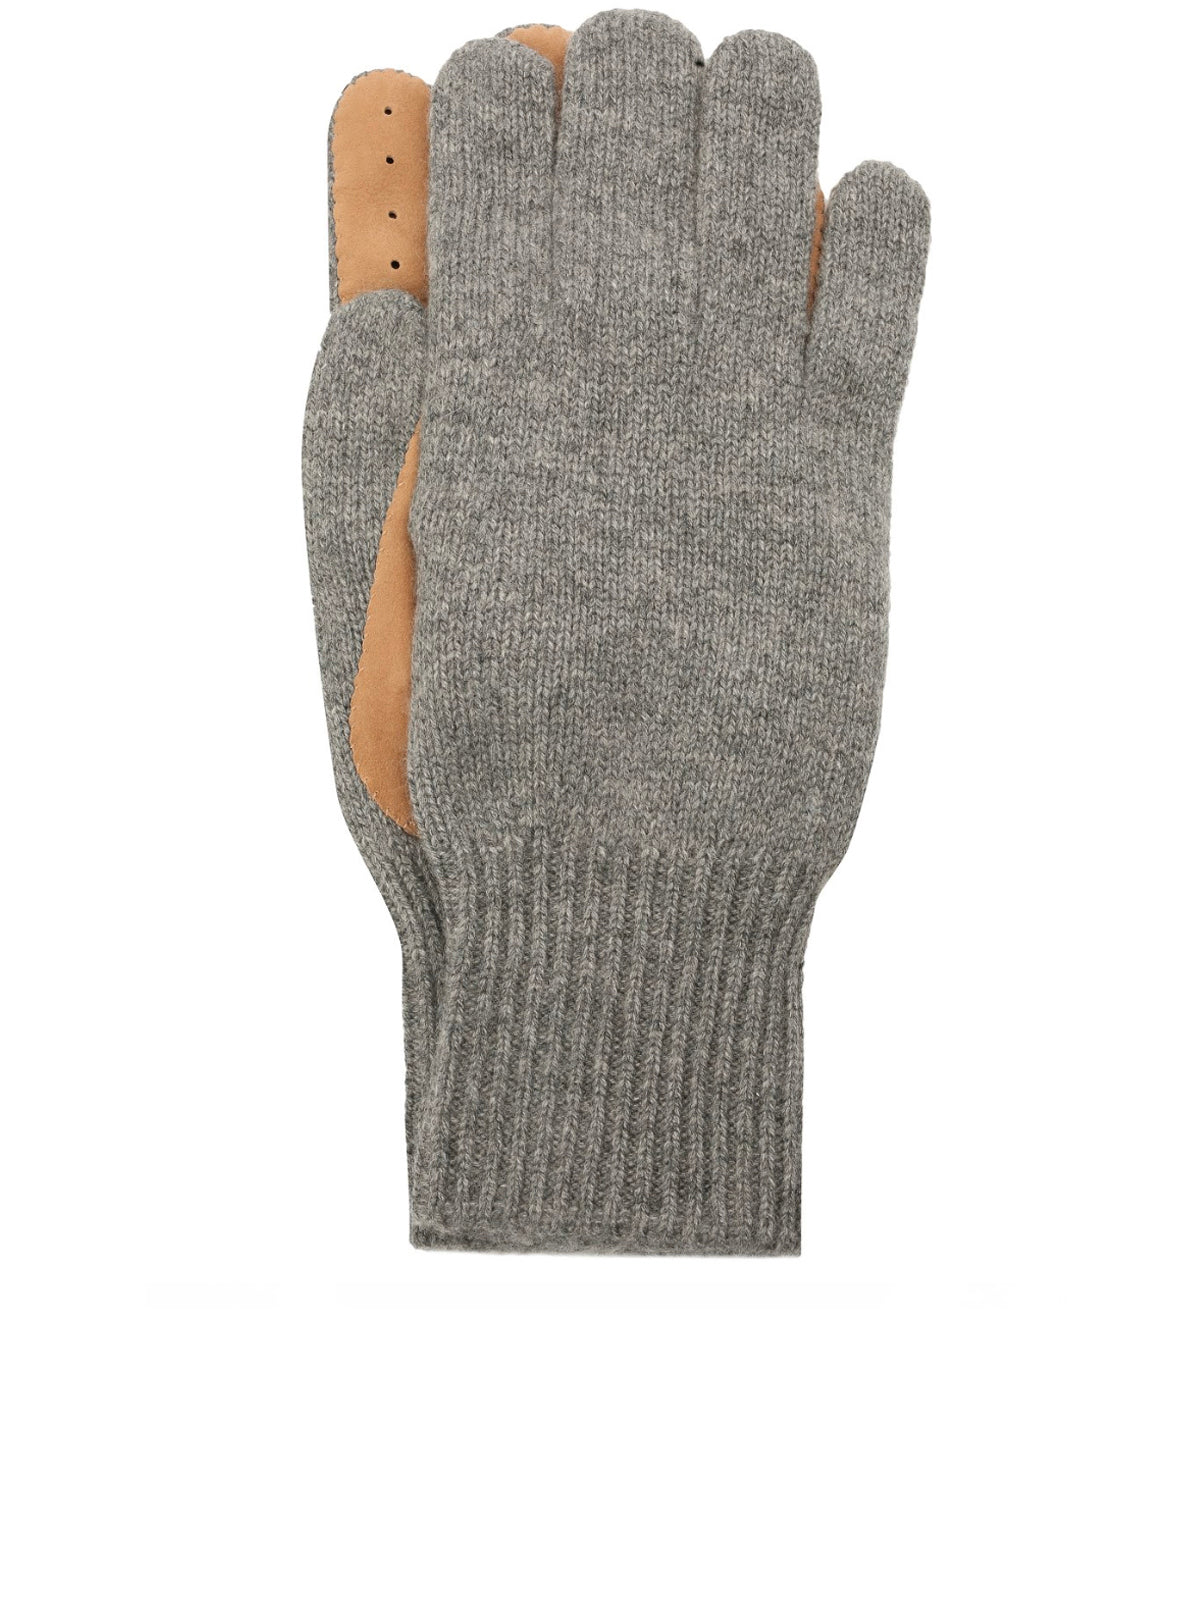 Cashmere knitted gloves with suede palm